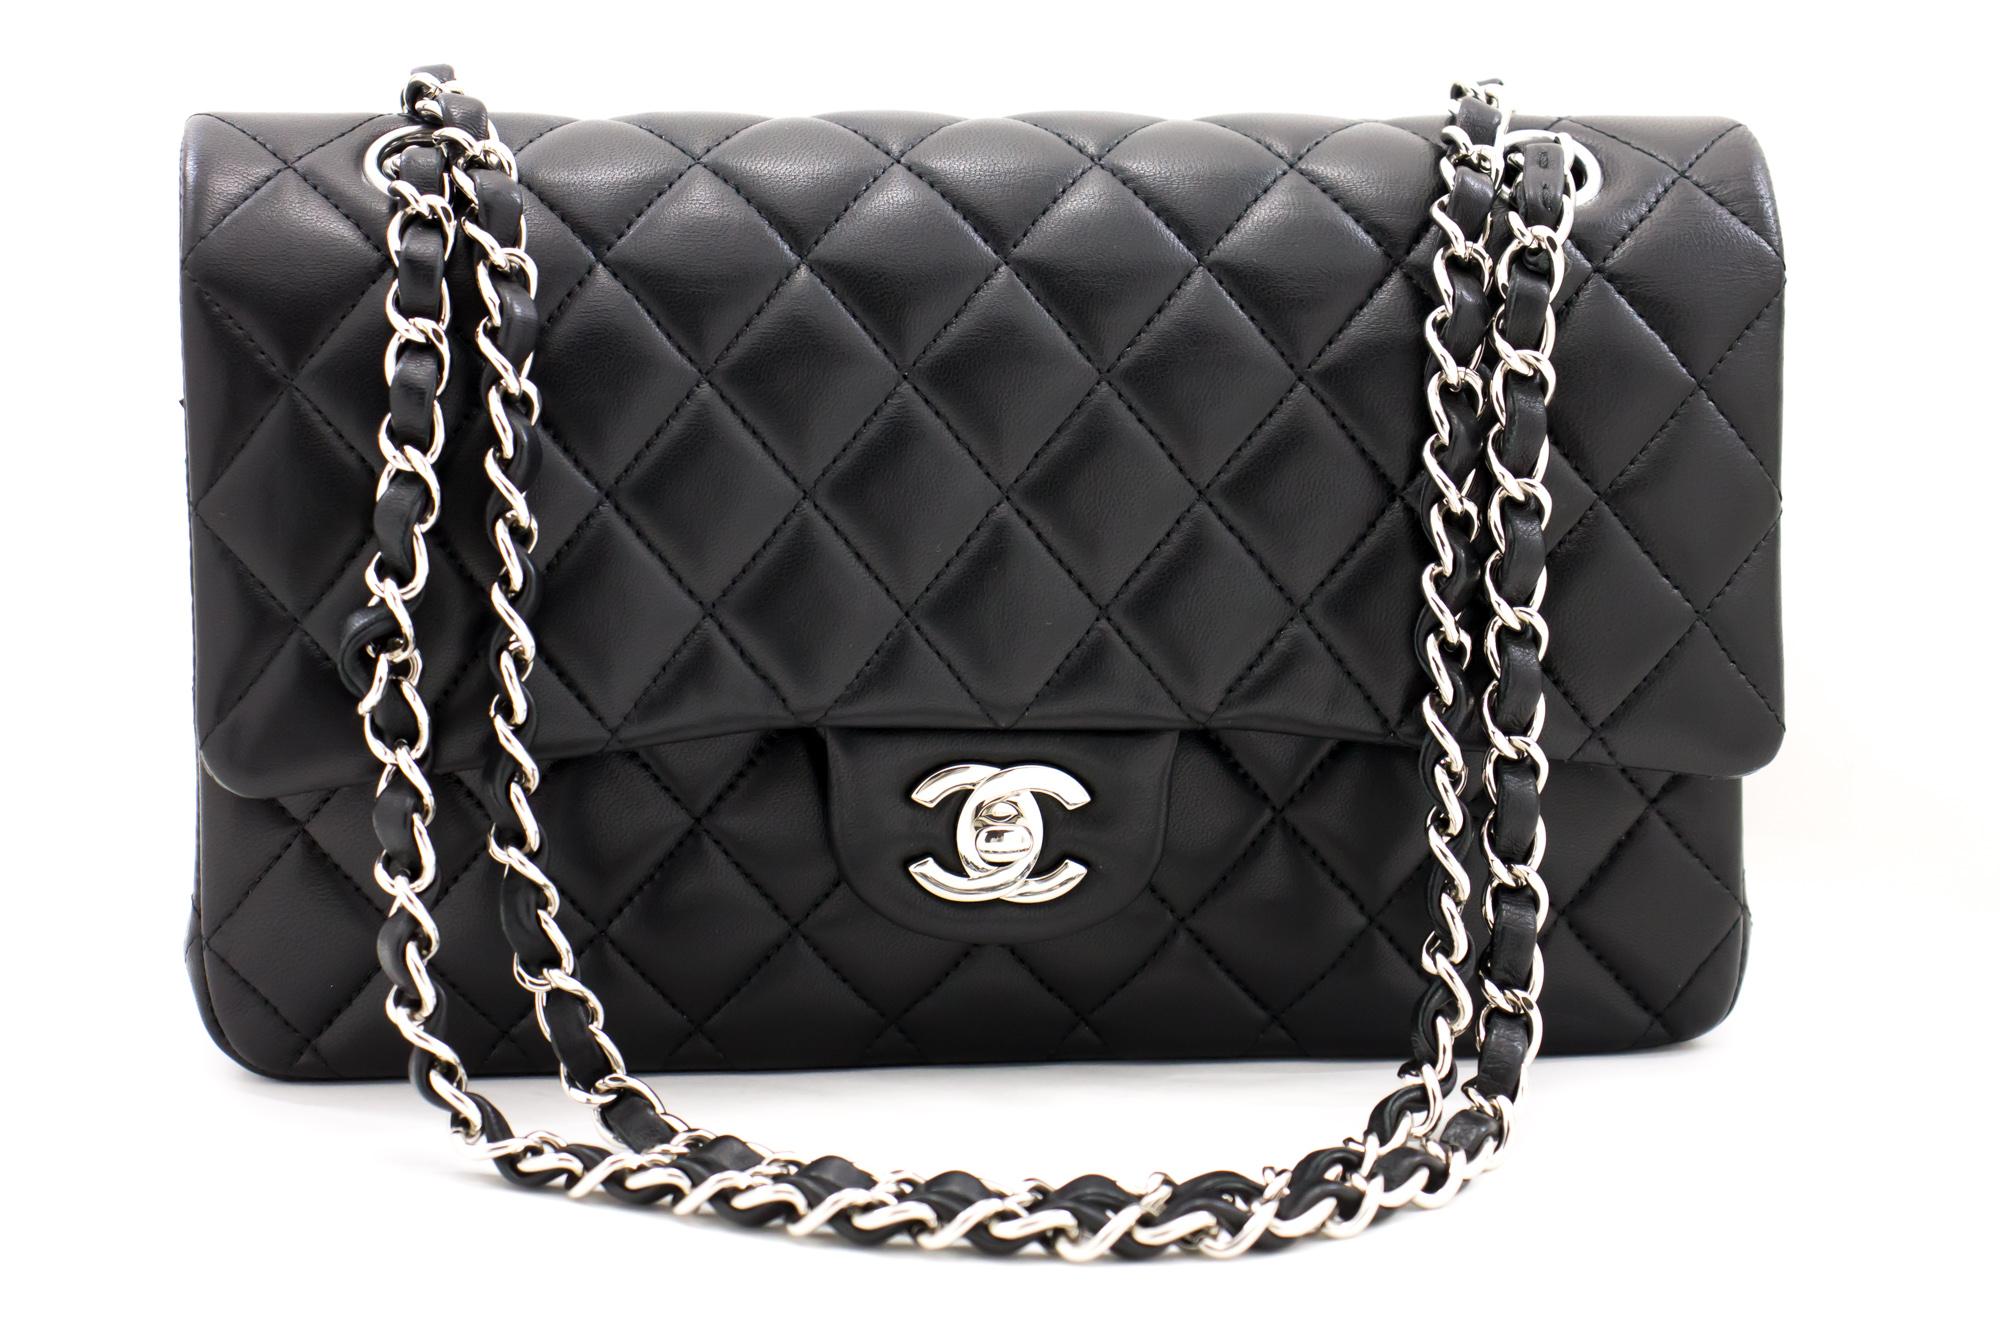 An authentic CHANEL 2019 2.55 Classic Double Flap Chain Shoulder Bag Black made of black Lambskin. The color is Black. The outside material is Leather. The pattern is Solid. This item is Contemporary. The year of manufacture would be